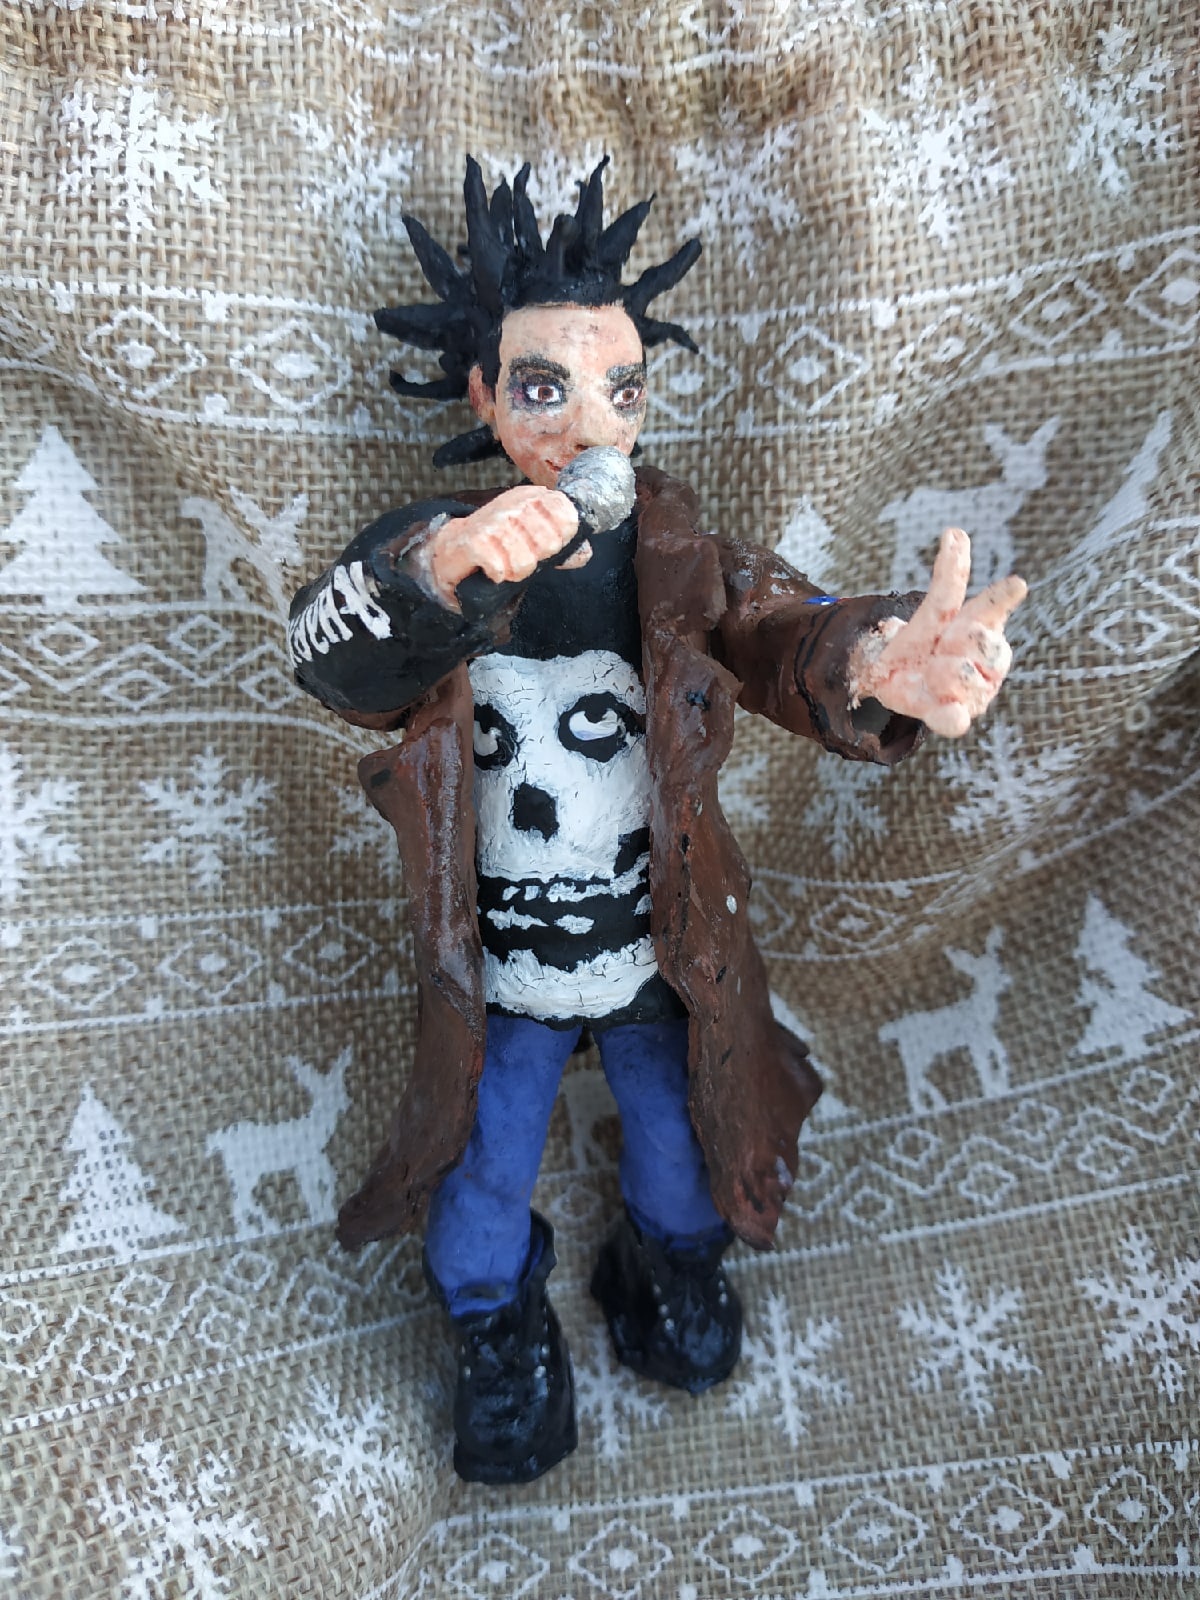 Gorshenev, author's figurine - My, Mikhail Gorshenev, King and the Clown, Toys, Figurines, Portrait doll, Sorcerer's Doll, Doll, Handmade, Dead Anarchist, Boots, Cotton wool, Acrylic, Punks, Longpost, Needlework without process